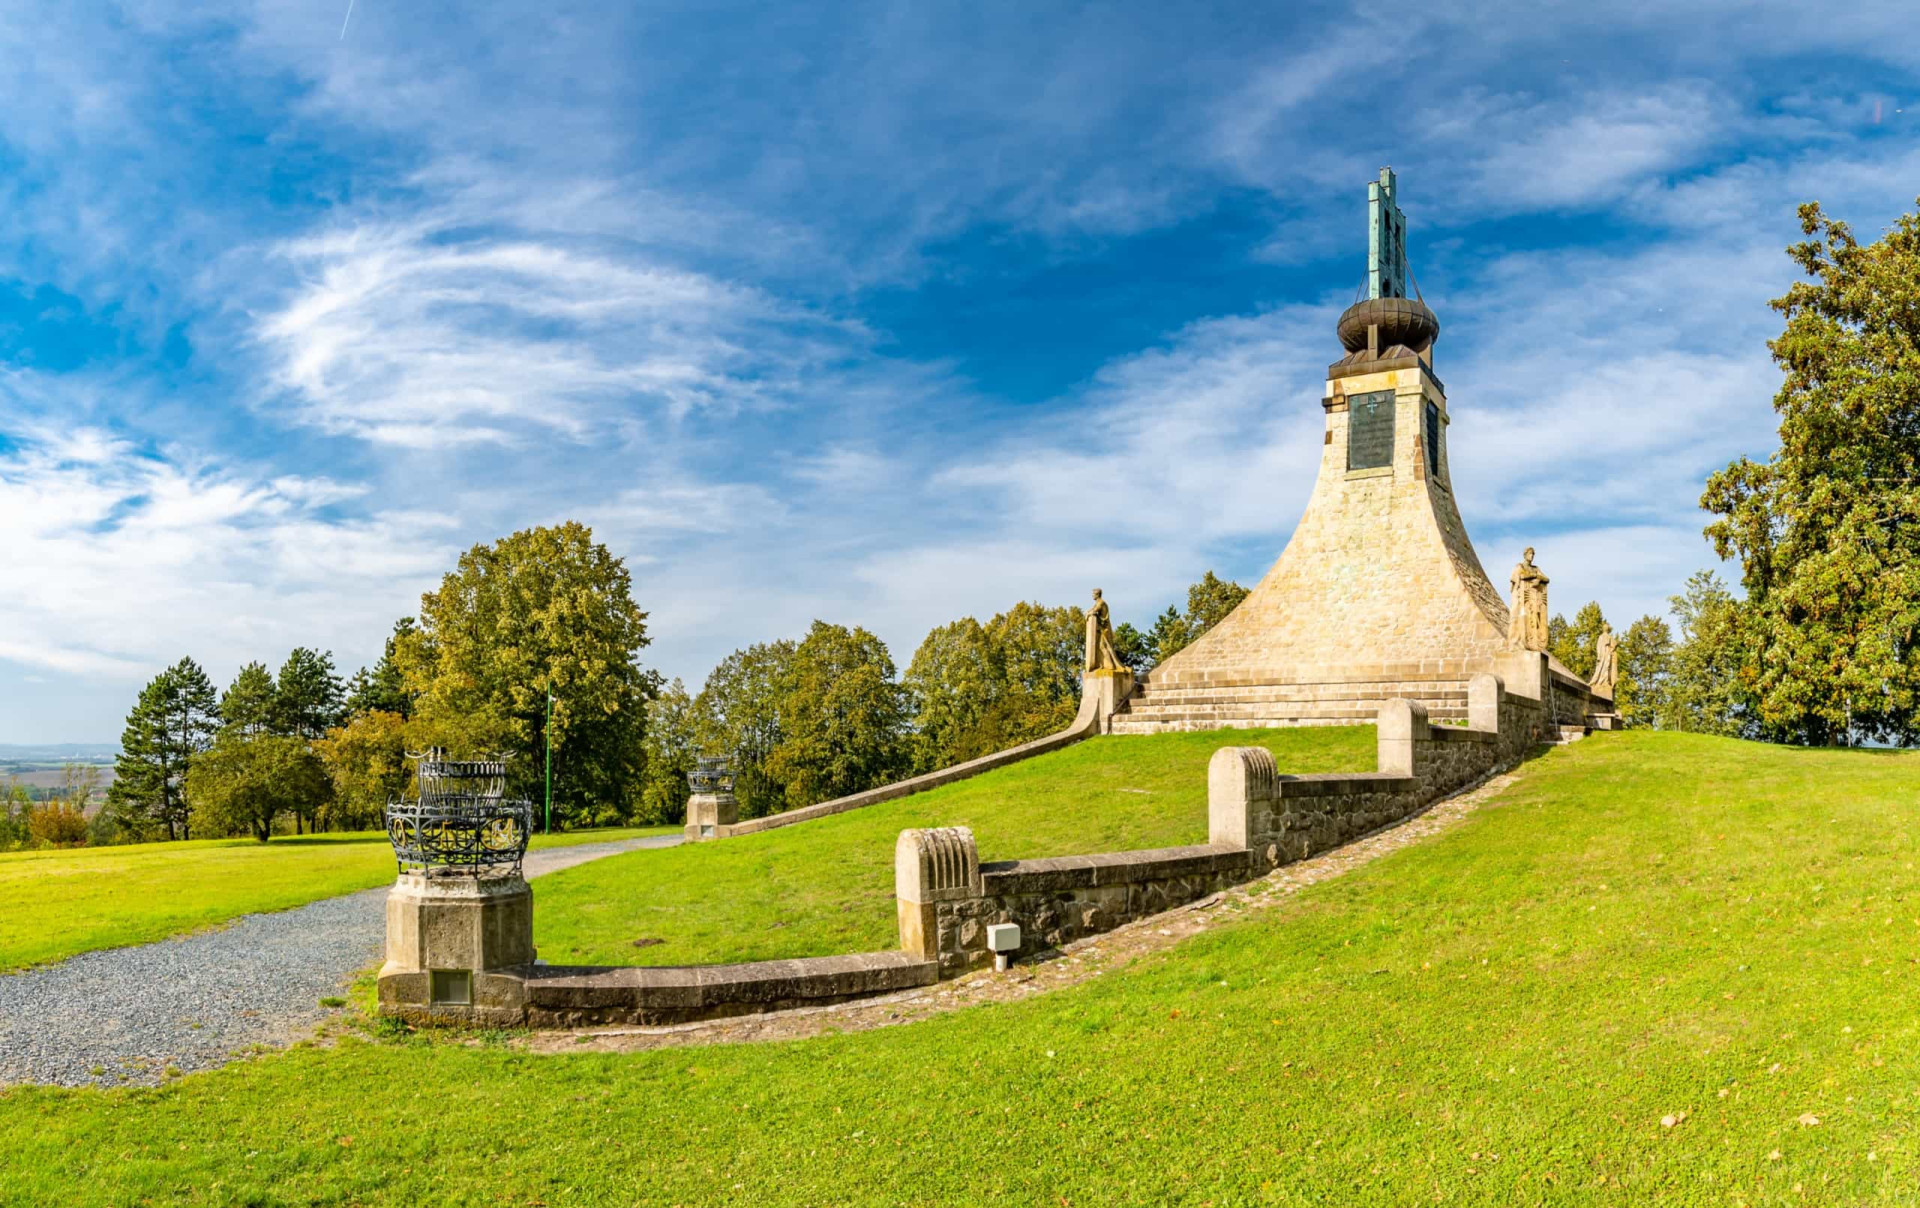 <p>The greatest military victory achieved by Napoleon took place near the town of Austerlitz in the Austrian Empire (modern-day Slavkov u Brna in the Czech Republic) when his<em> Grande Armée</em> defeated larger Russian and Austrian forces on December 2, 1805. The battlefield is overlooked by an impressive memorial.</p><p>You may also like:<a href="https://www.starsinsider.com/n/467932?utm_source=msn.com&utm_medium=display&utm_campaign=referral_description&utm_content=627984en-za"> Remembering the best of the 'Friends' guest stars</a></p>